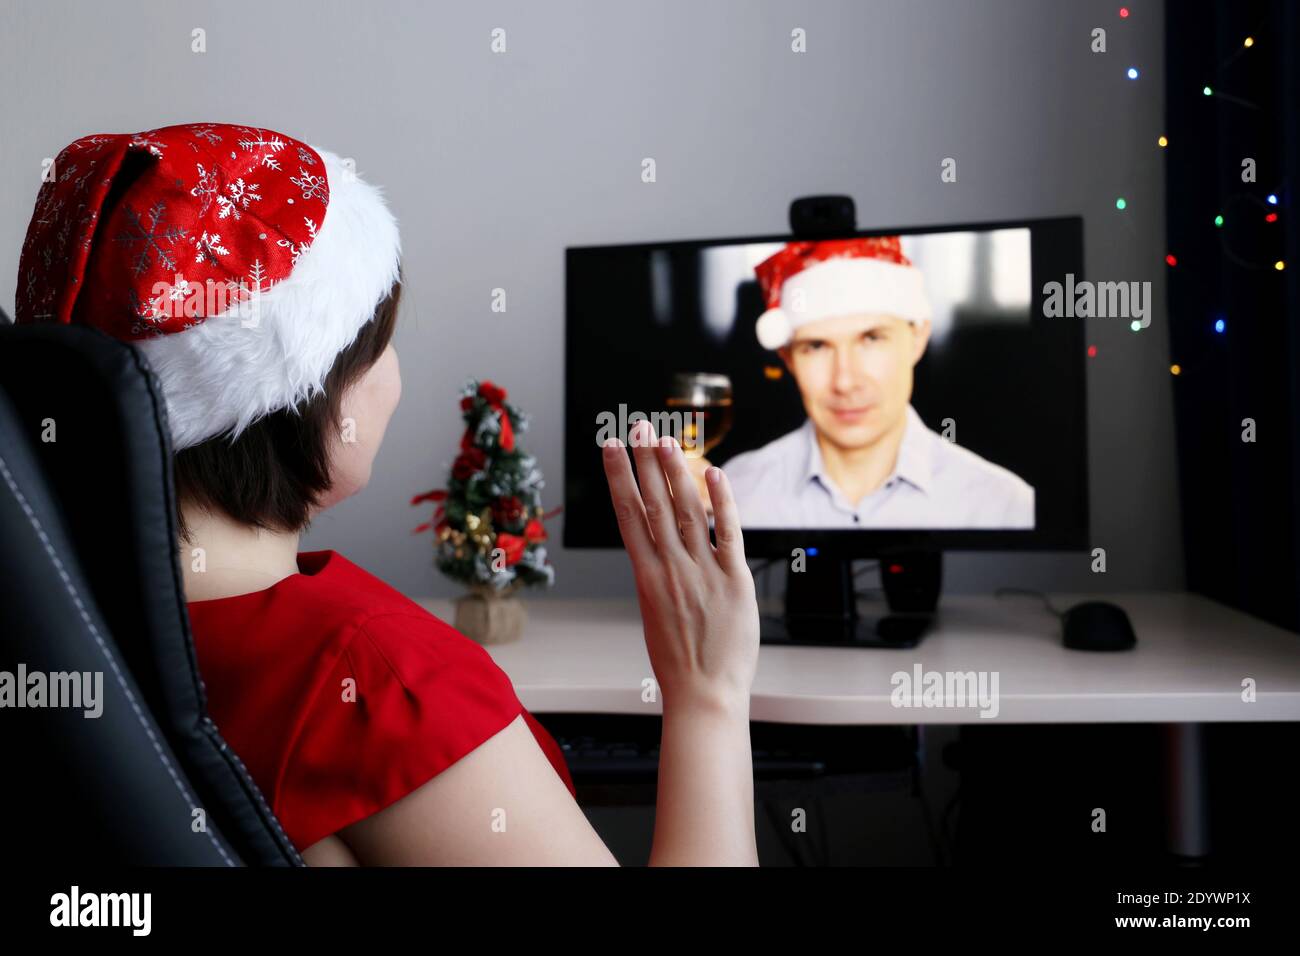 New Year celebration at a distance during coronavirus pandemic. Woman in Santa hat sitting in chair in front of PC webcam, love couple Stock Photo